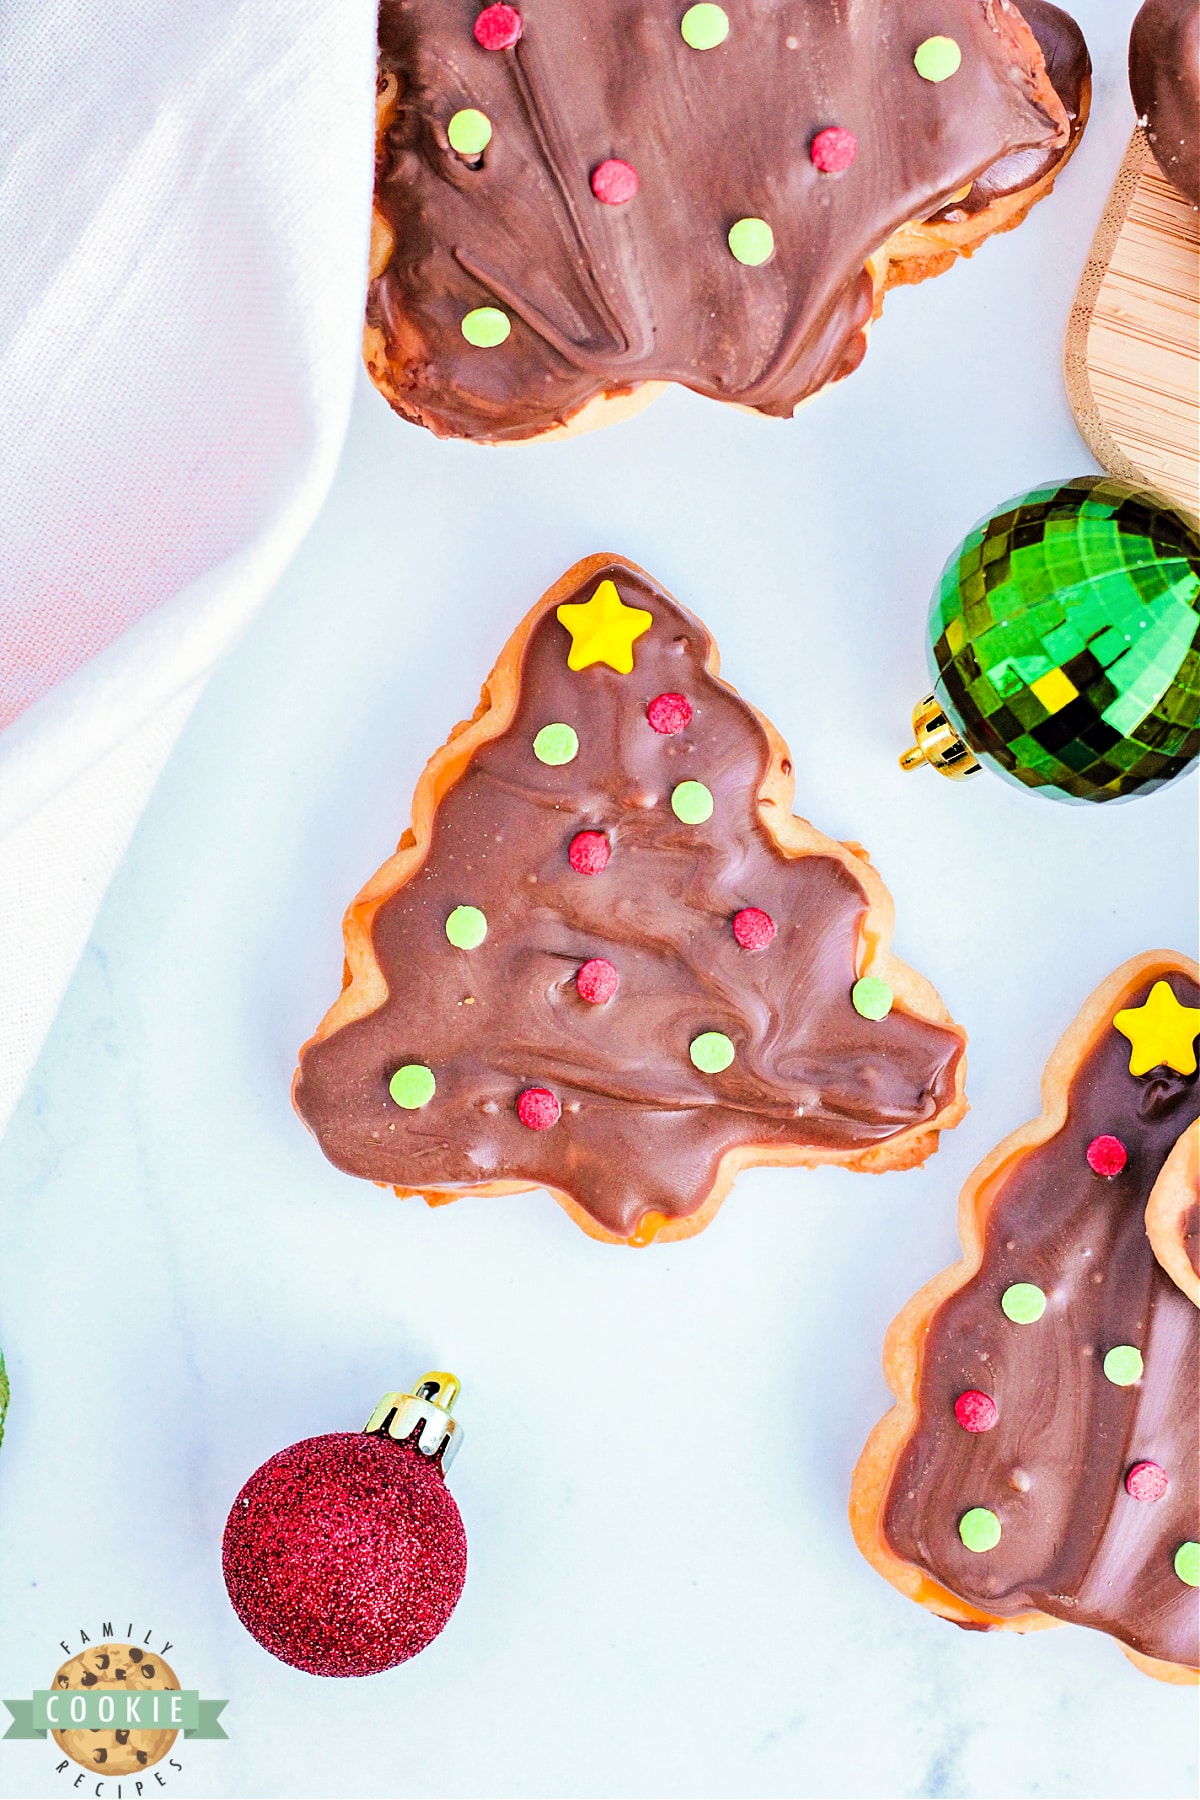 Homemade twix cookies in the shape of Christmas trees.